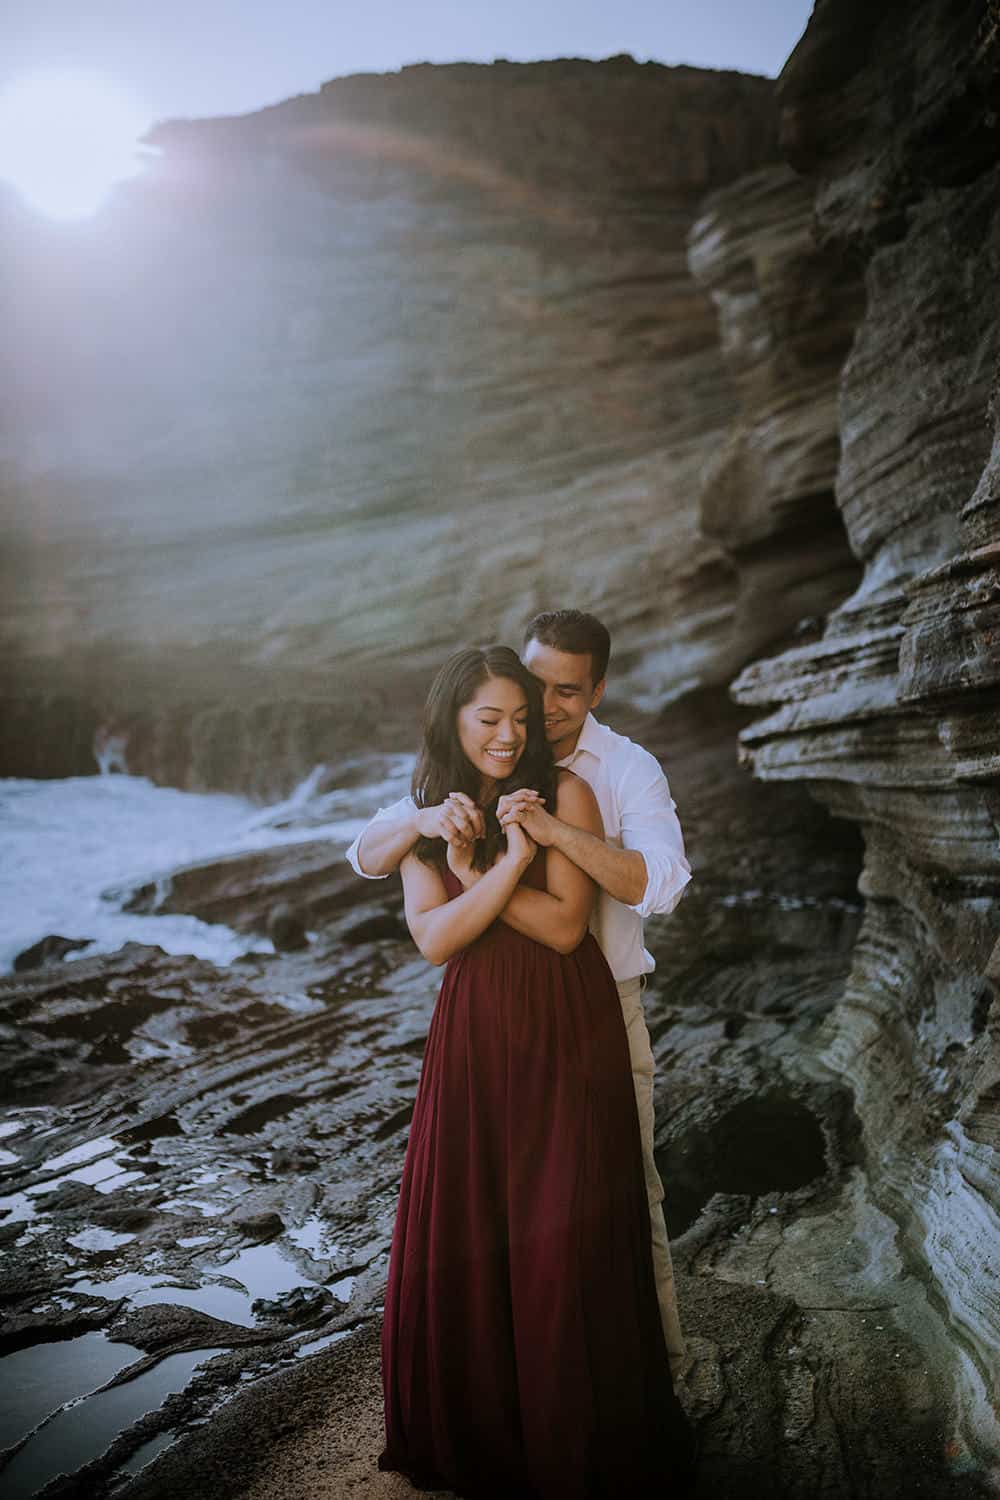 Need help editing? This blog includes my exact editing workflow and top tips for photographers looking to improve their business by Anela Benavides, Hawaii wedding and engagement photographer and photographer mentor #photography #editing #editingworkflow #editingtips